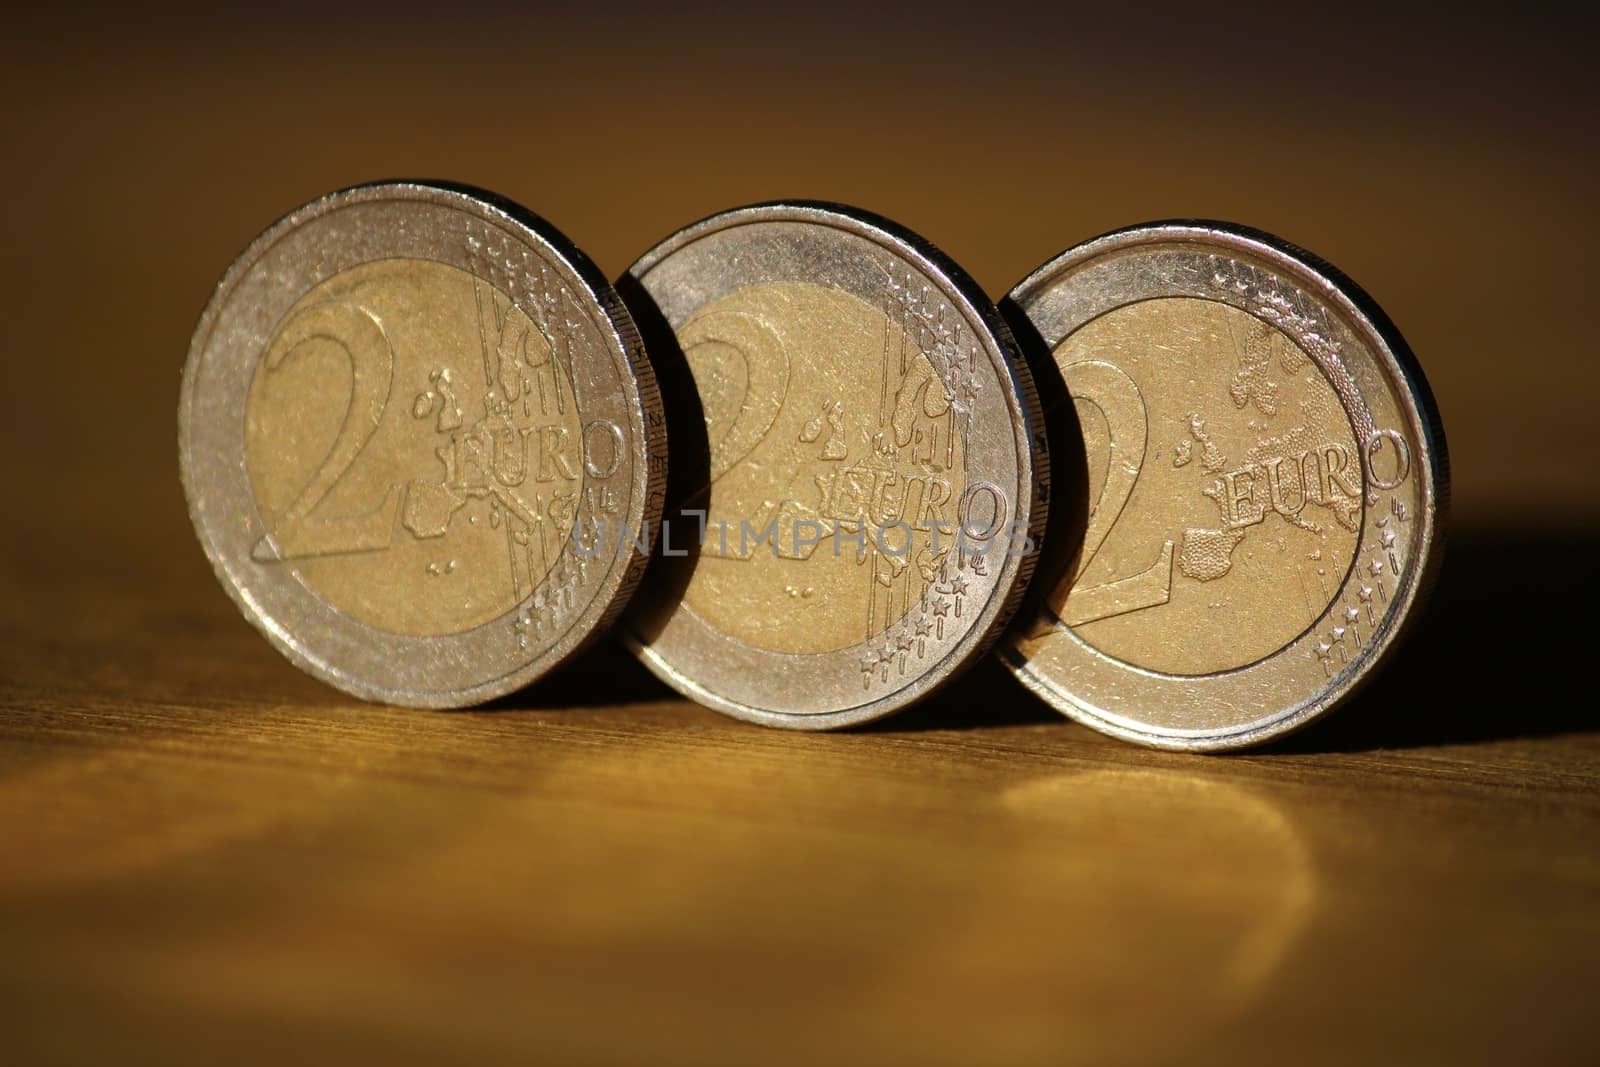 Two euro coins on brown wooden board